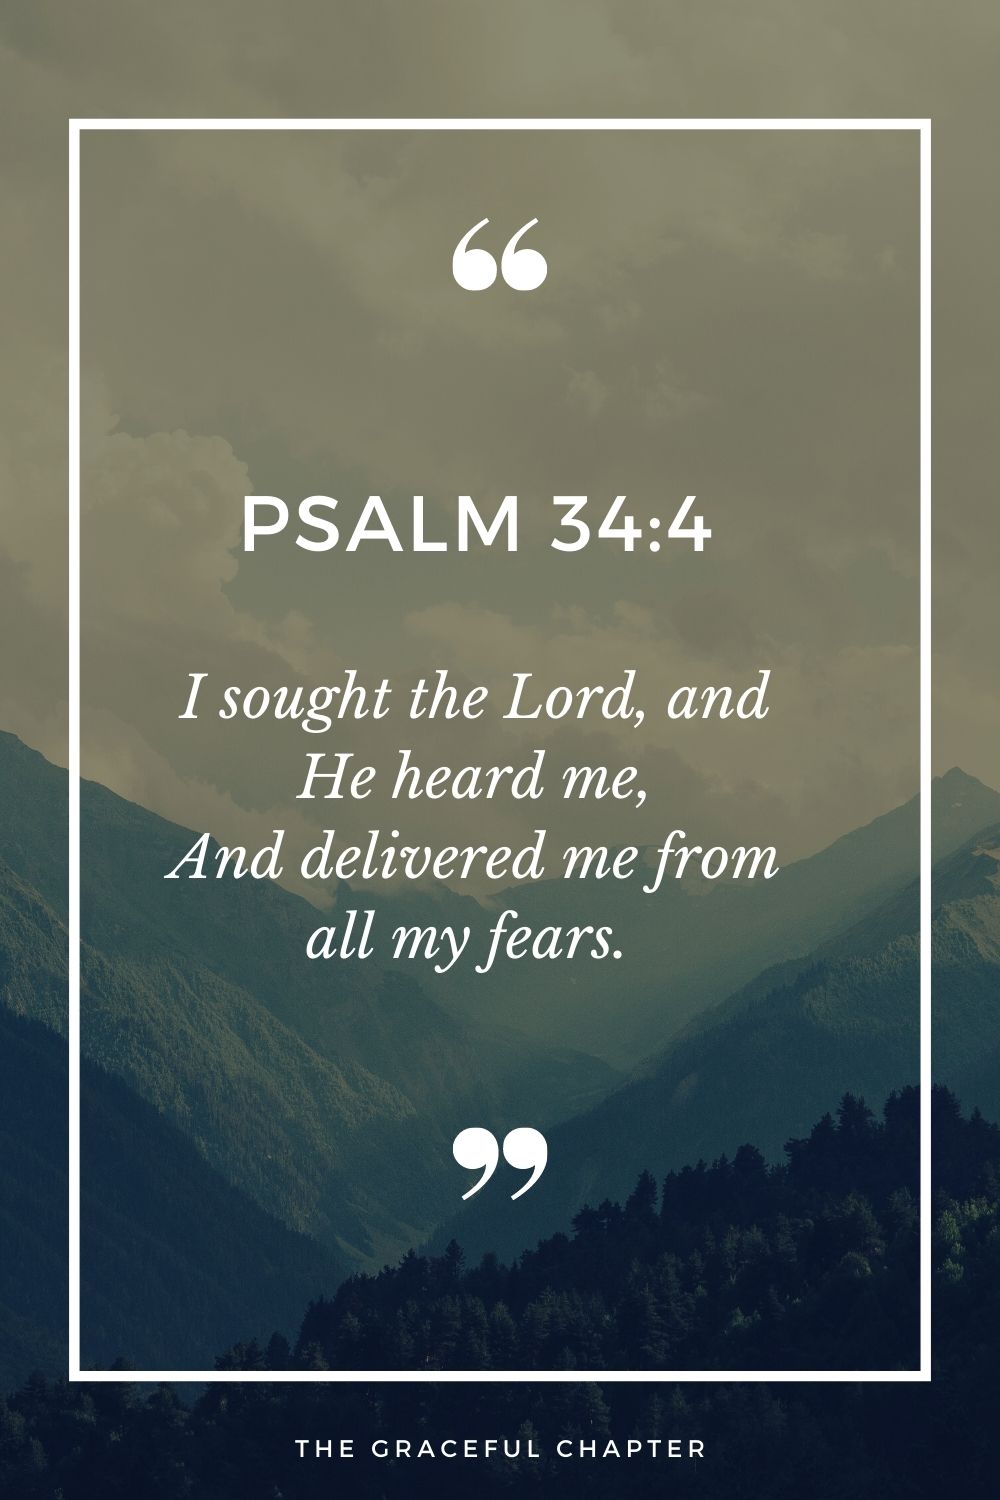 I sought the Lord, and He heard me, And delivered me from all my fears.  Psalm 34:4